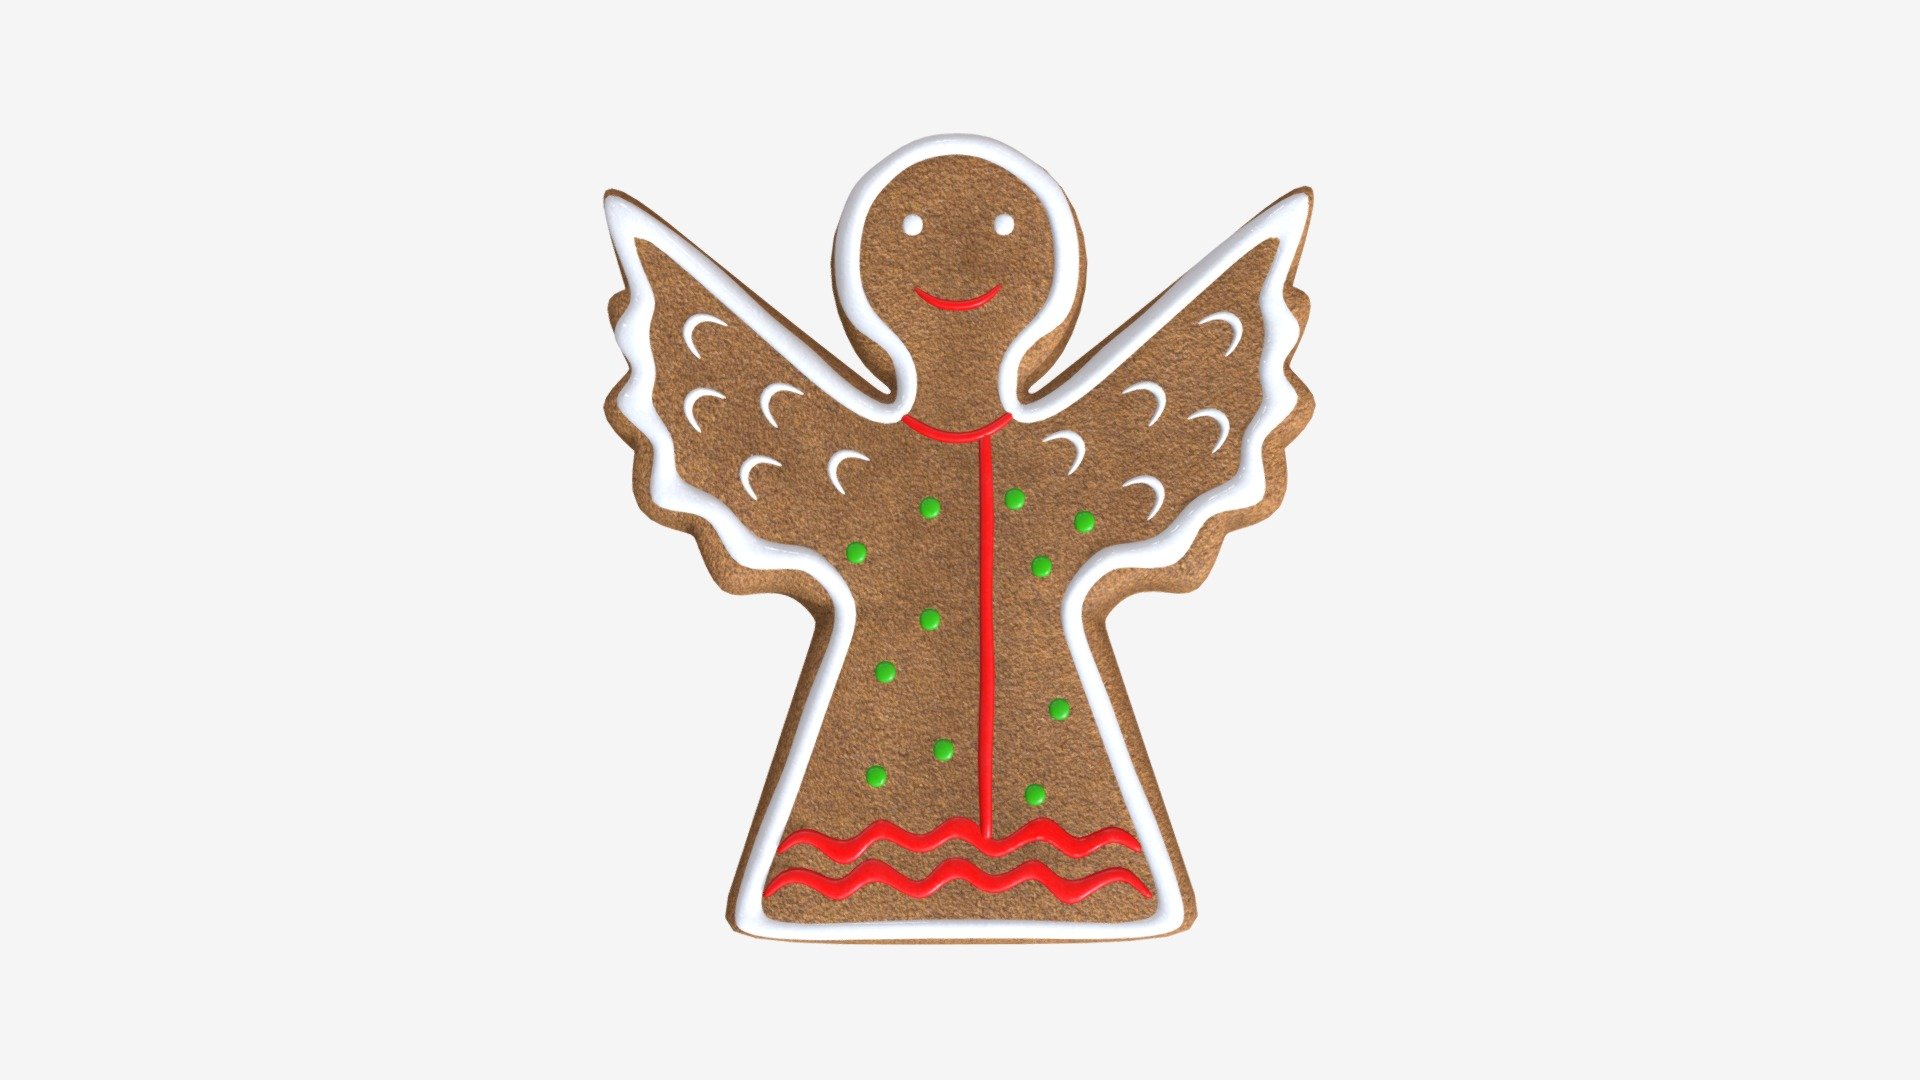 Created in 3ds max 2016
Saved to 3ds max 2013
Units: Centimeters
Dimension: 6.29 x 7.1 x 0.83
Polys: 17496
XForm: Yes
Box Trick: No
Model Parts: 1 - Gingerbread cookie 09 - Buy Royalty Free 3D model by HQ3DMOD (@AivisAstics) 3d model